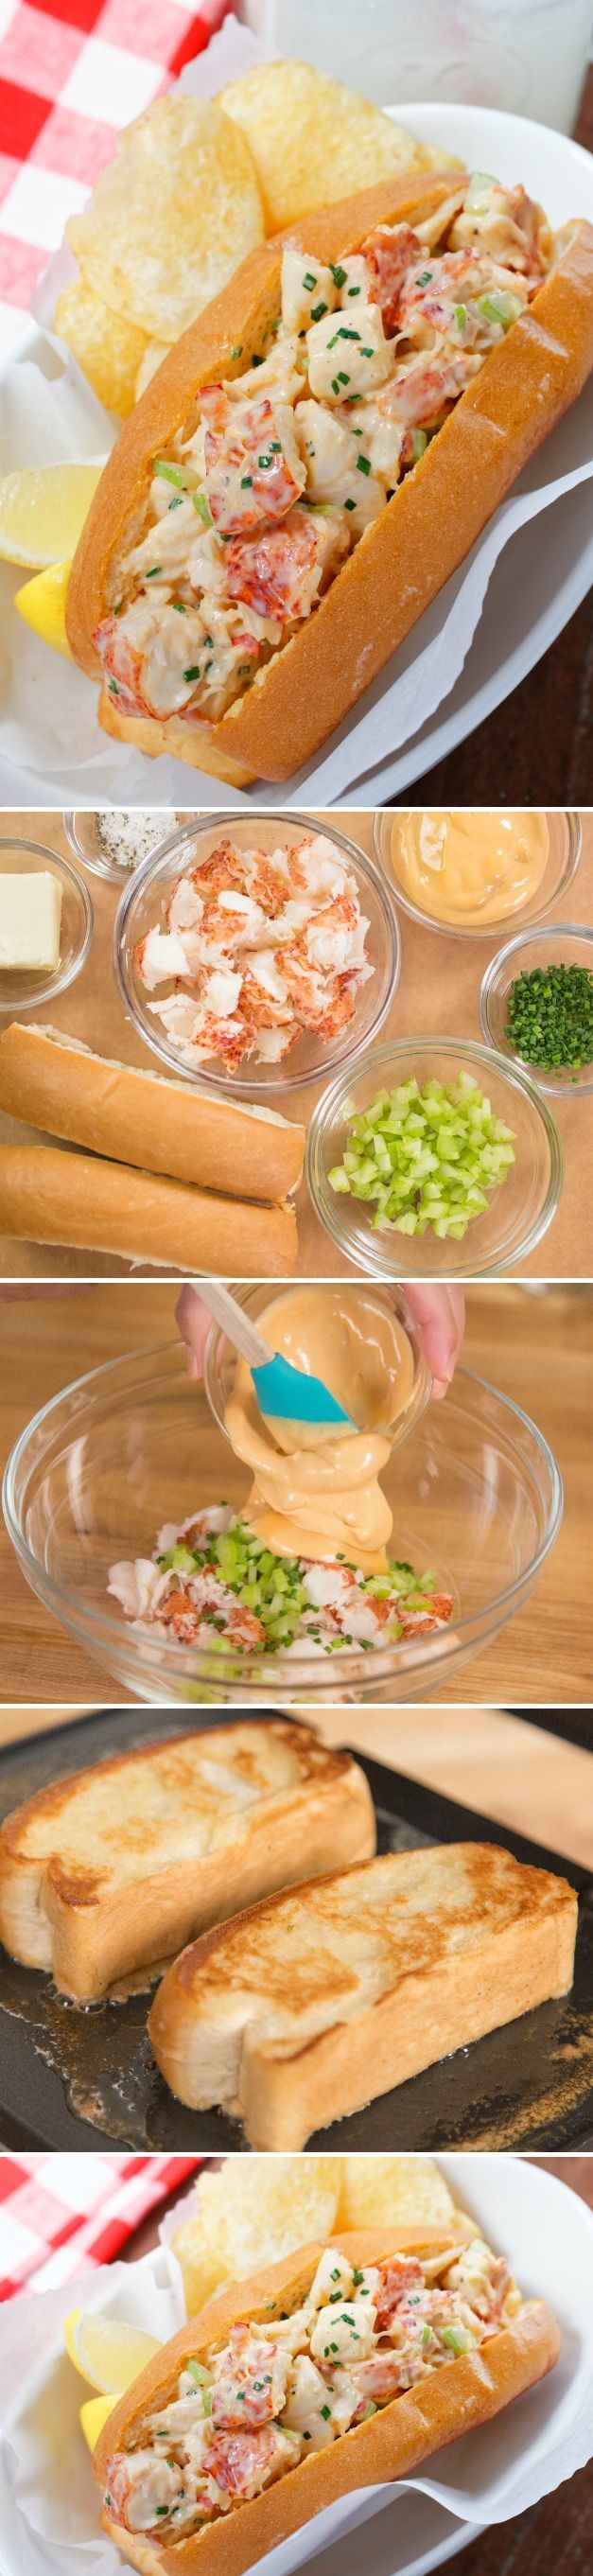 Get this delicious and easy-to-follow Lobster Roll recipe on JustOneCookbook.com. Sweet, succulent lobster meat coated with spicy